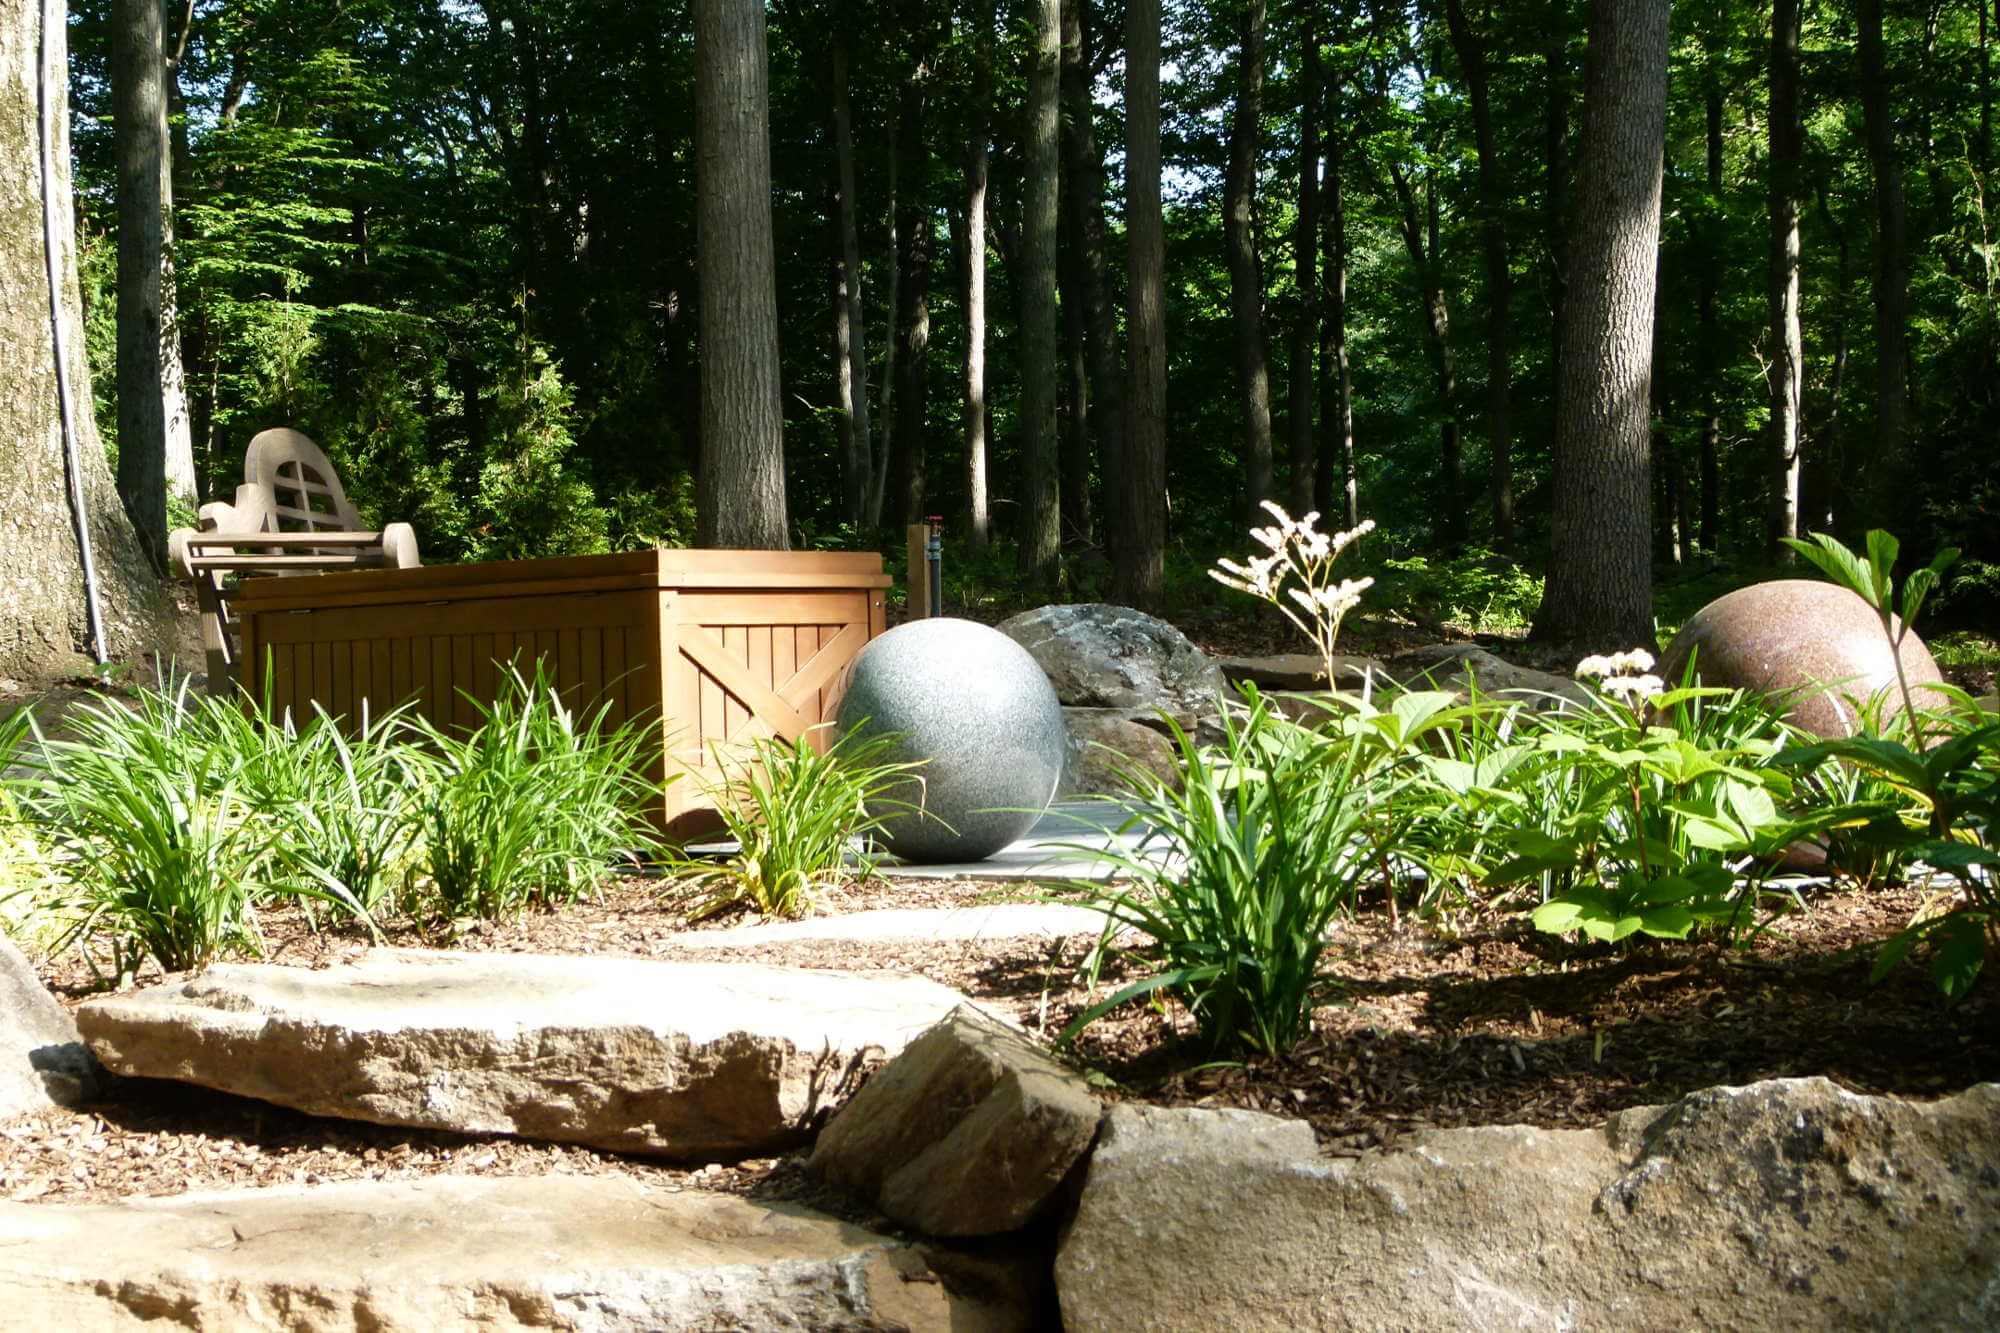 Granite orbs in sitting area with bench and stepping stones